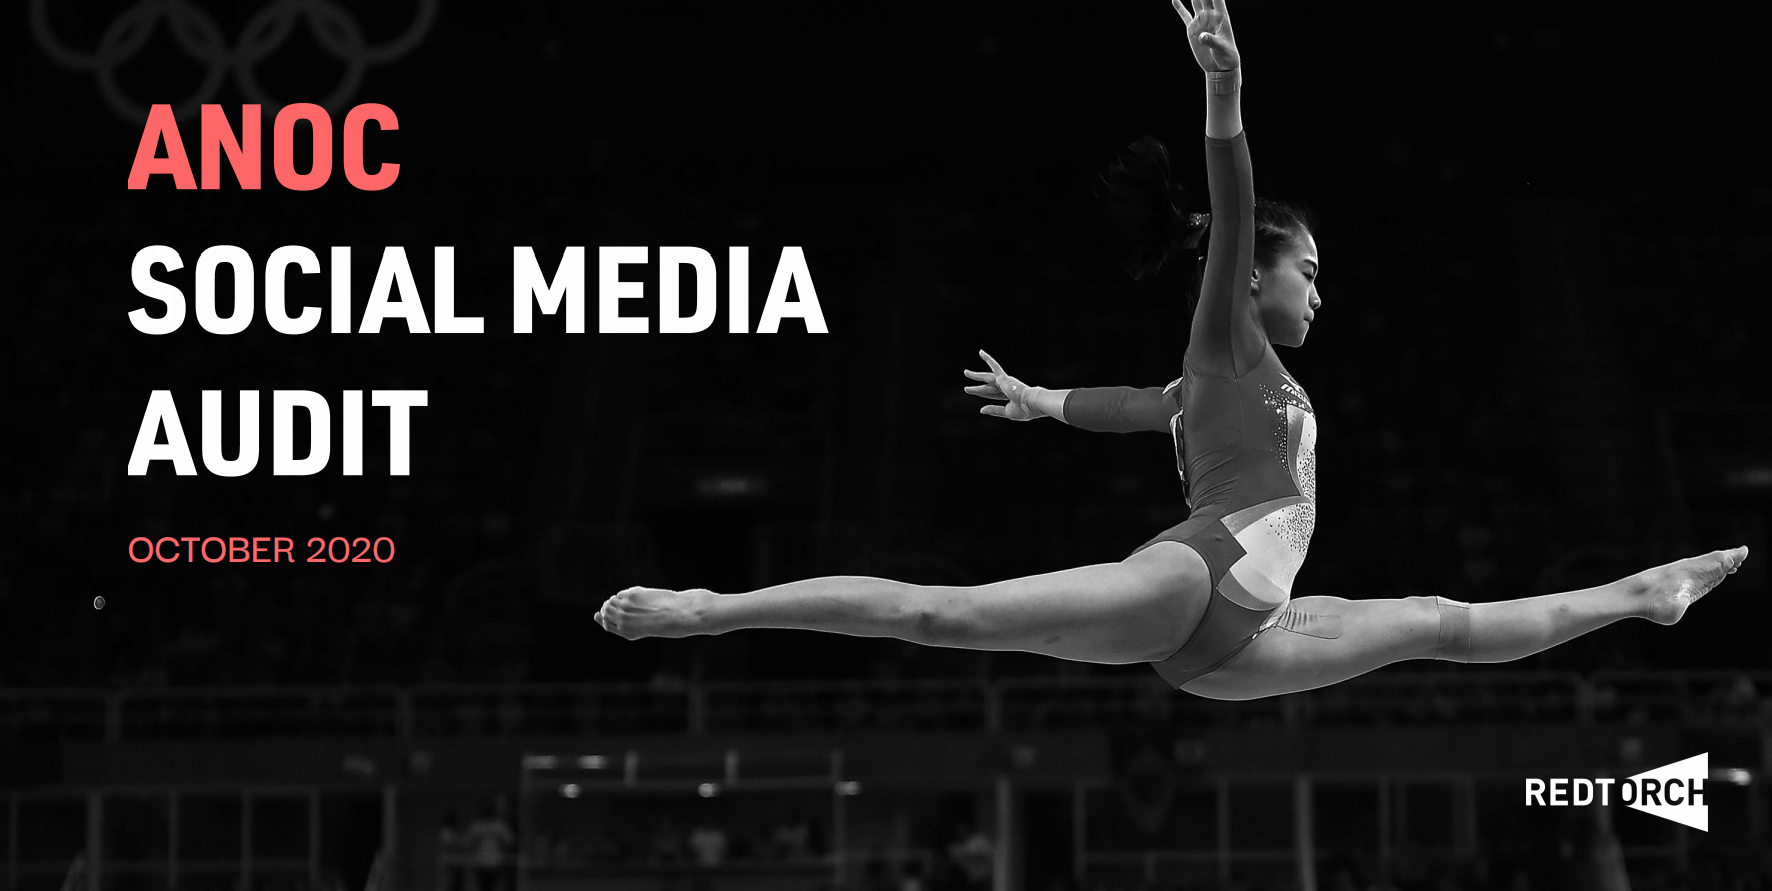 ANOC Social Media Survey reveals National Olympic Committees have 28 million followers, with more than half on Facebook 